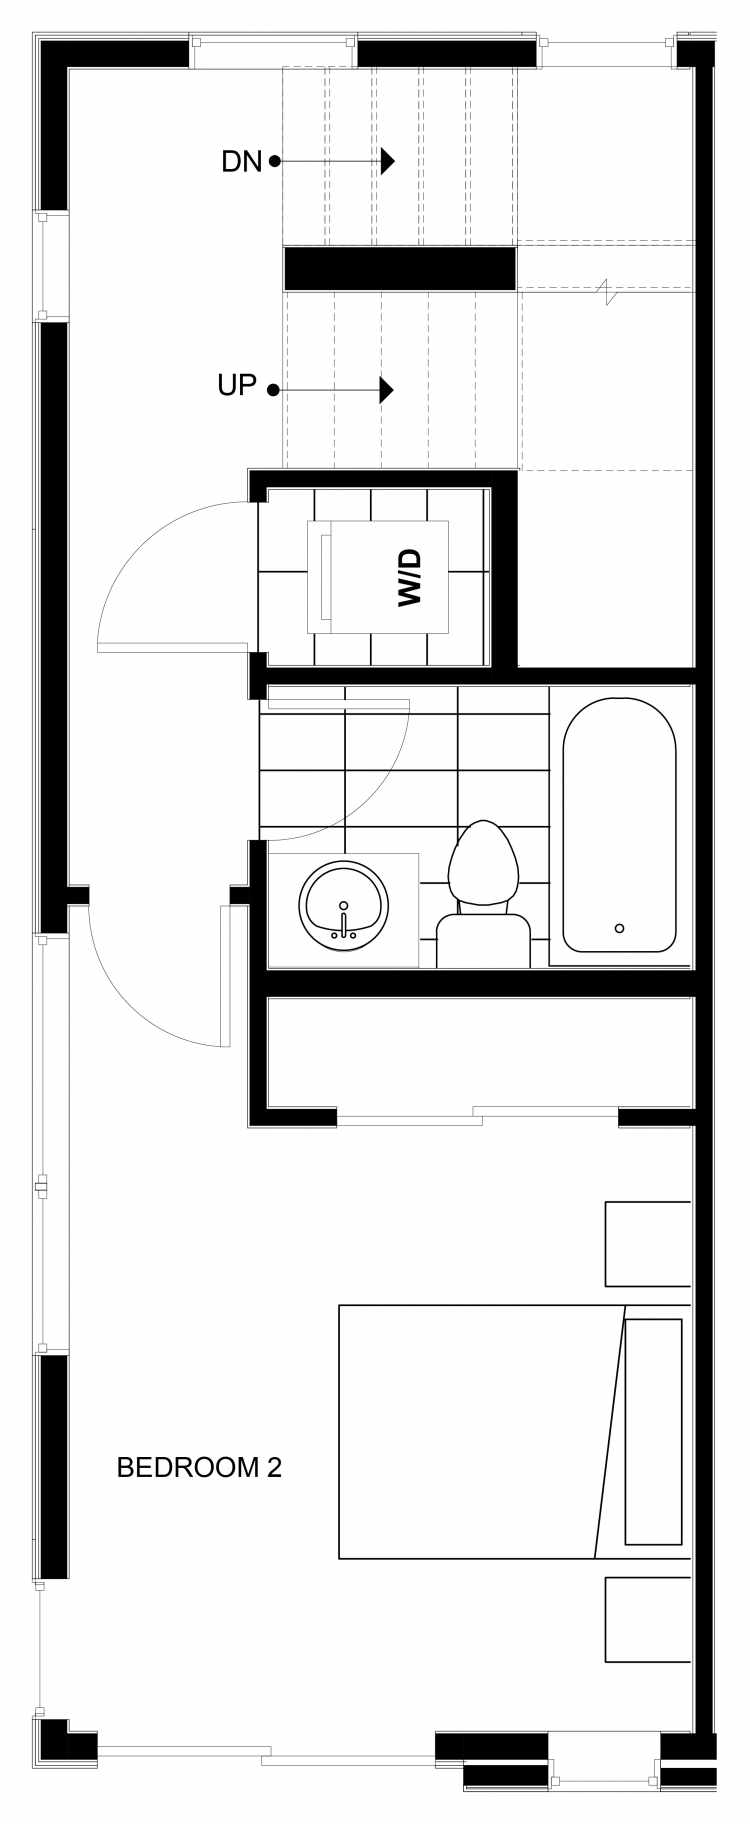 Third Floor Plan of 1544 15th Ave E, One of the Grandview Townhomes in Capitol Hill